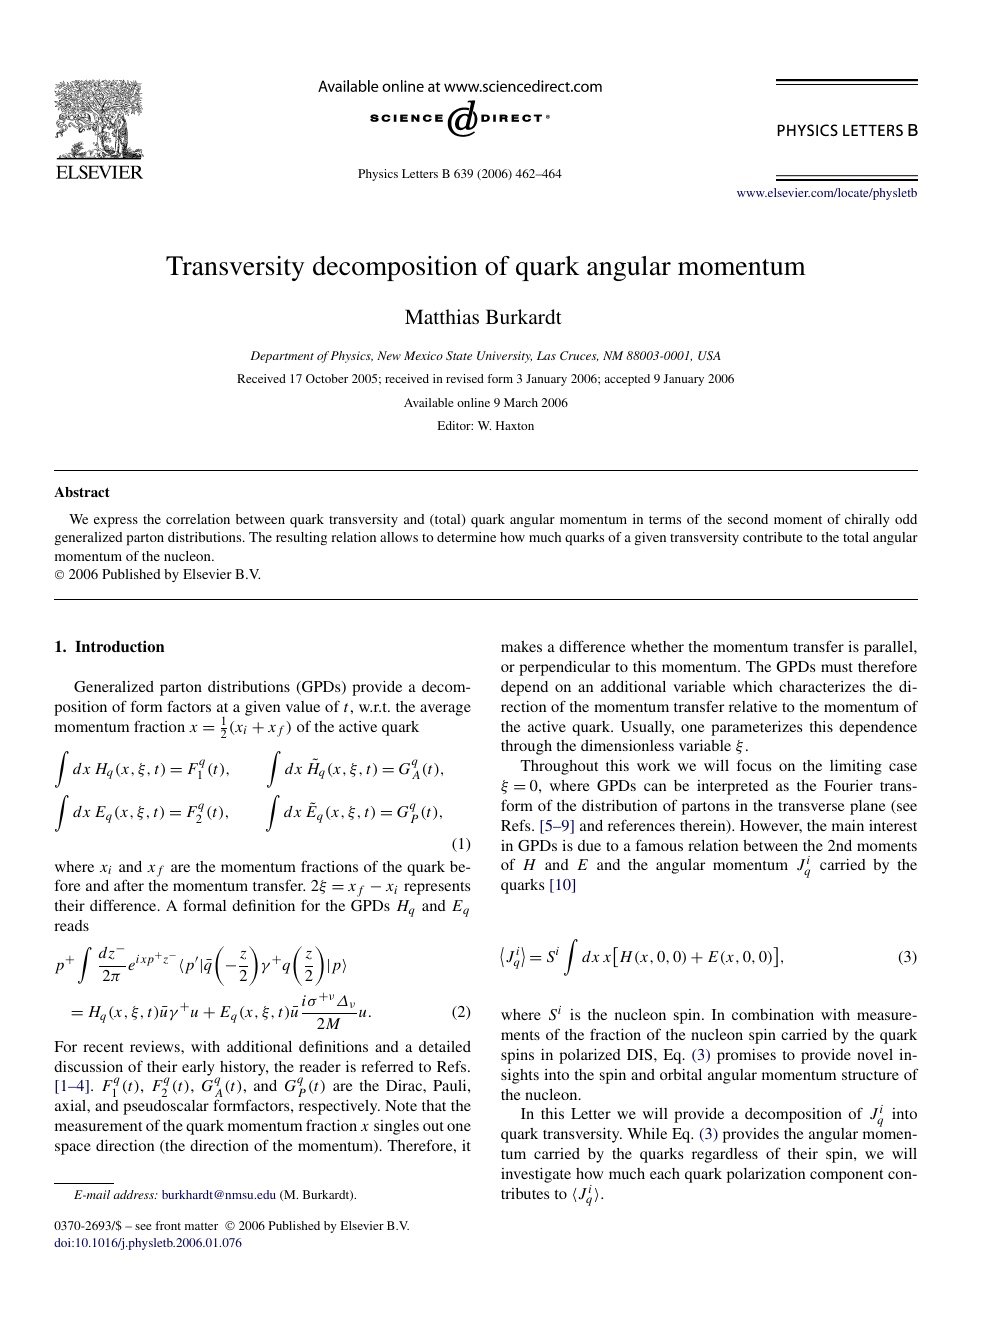 Transversity Decomposition Of Quark Angular Momentum Topic Of Research Paper In Physical Sciences Download Scholarly Article Pdf And Read For Free On Cyberleninka Open Science Hub